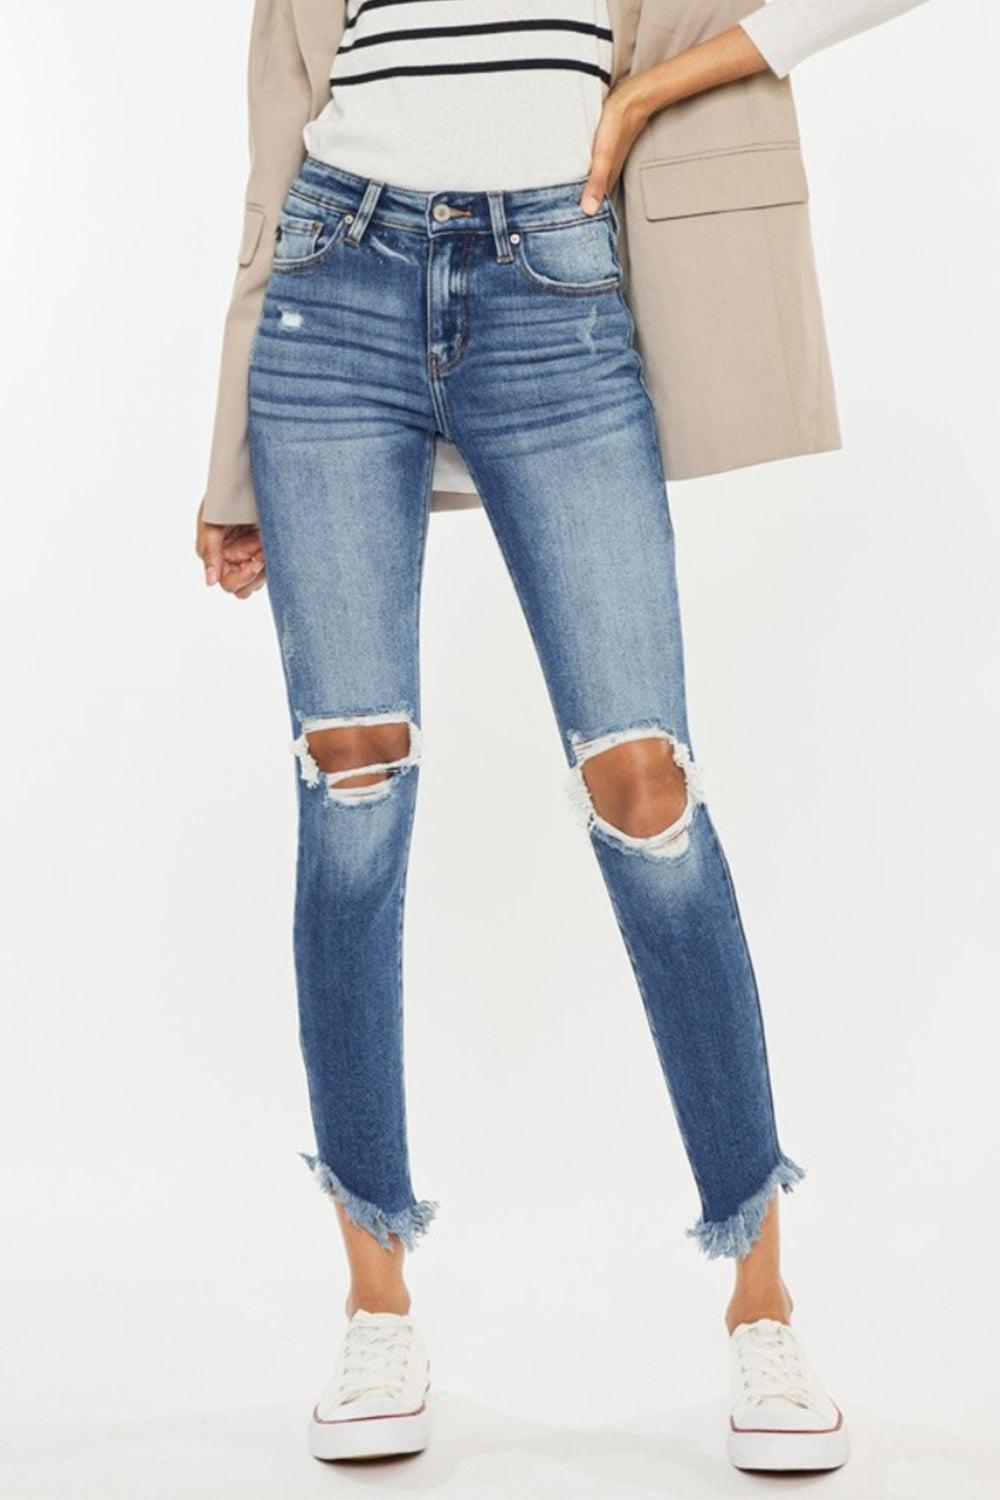 a woman wearing ripped jeans and a jacket